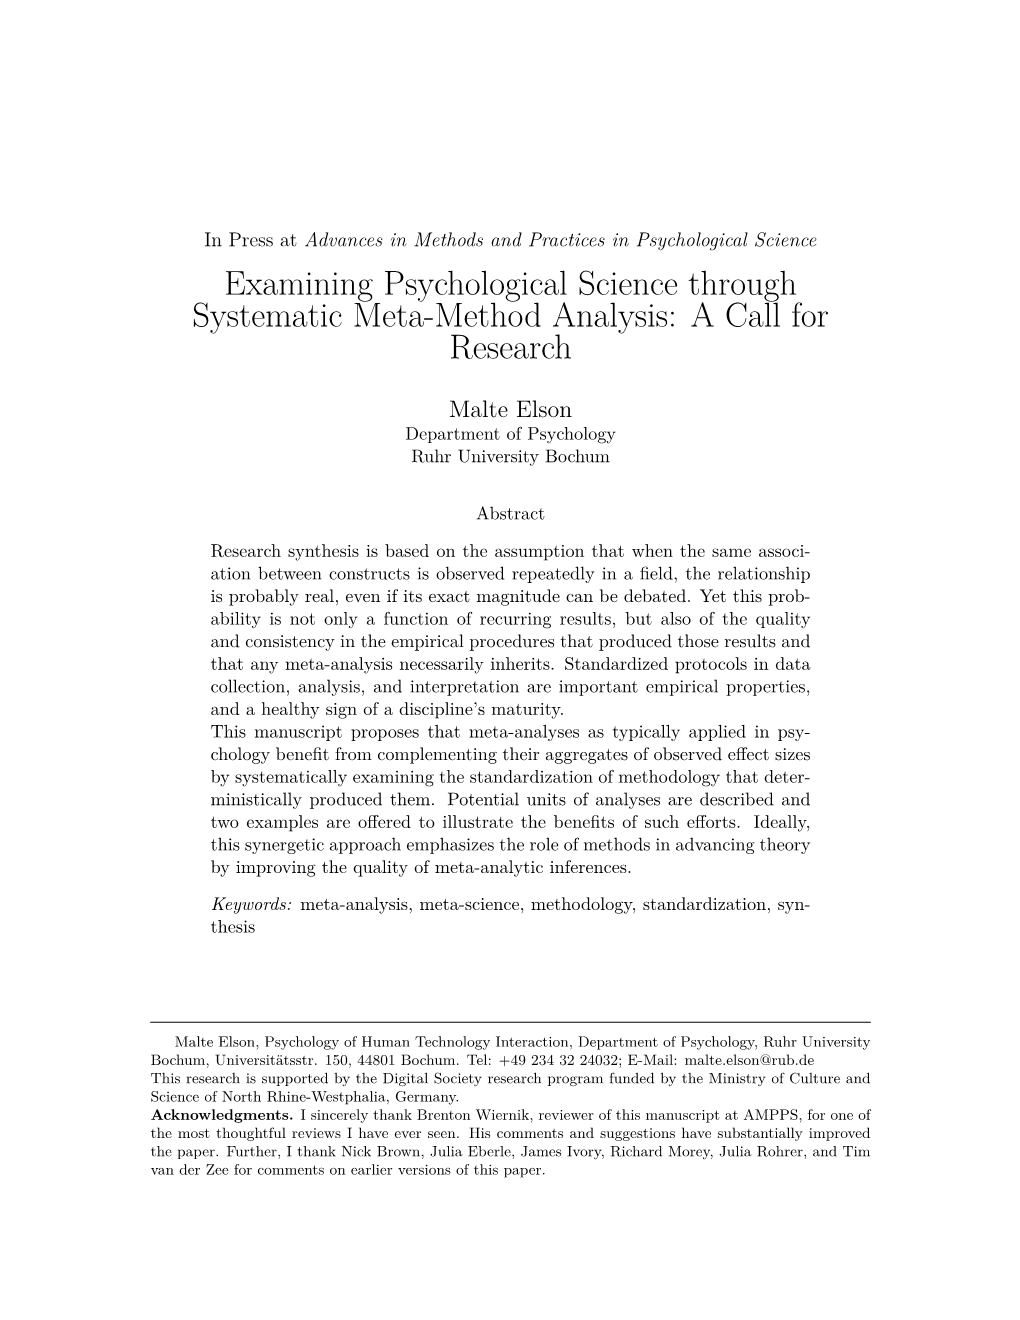 Examining Psychological Science Through Systematic Meta-Method Analysis: a Call for Research